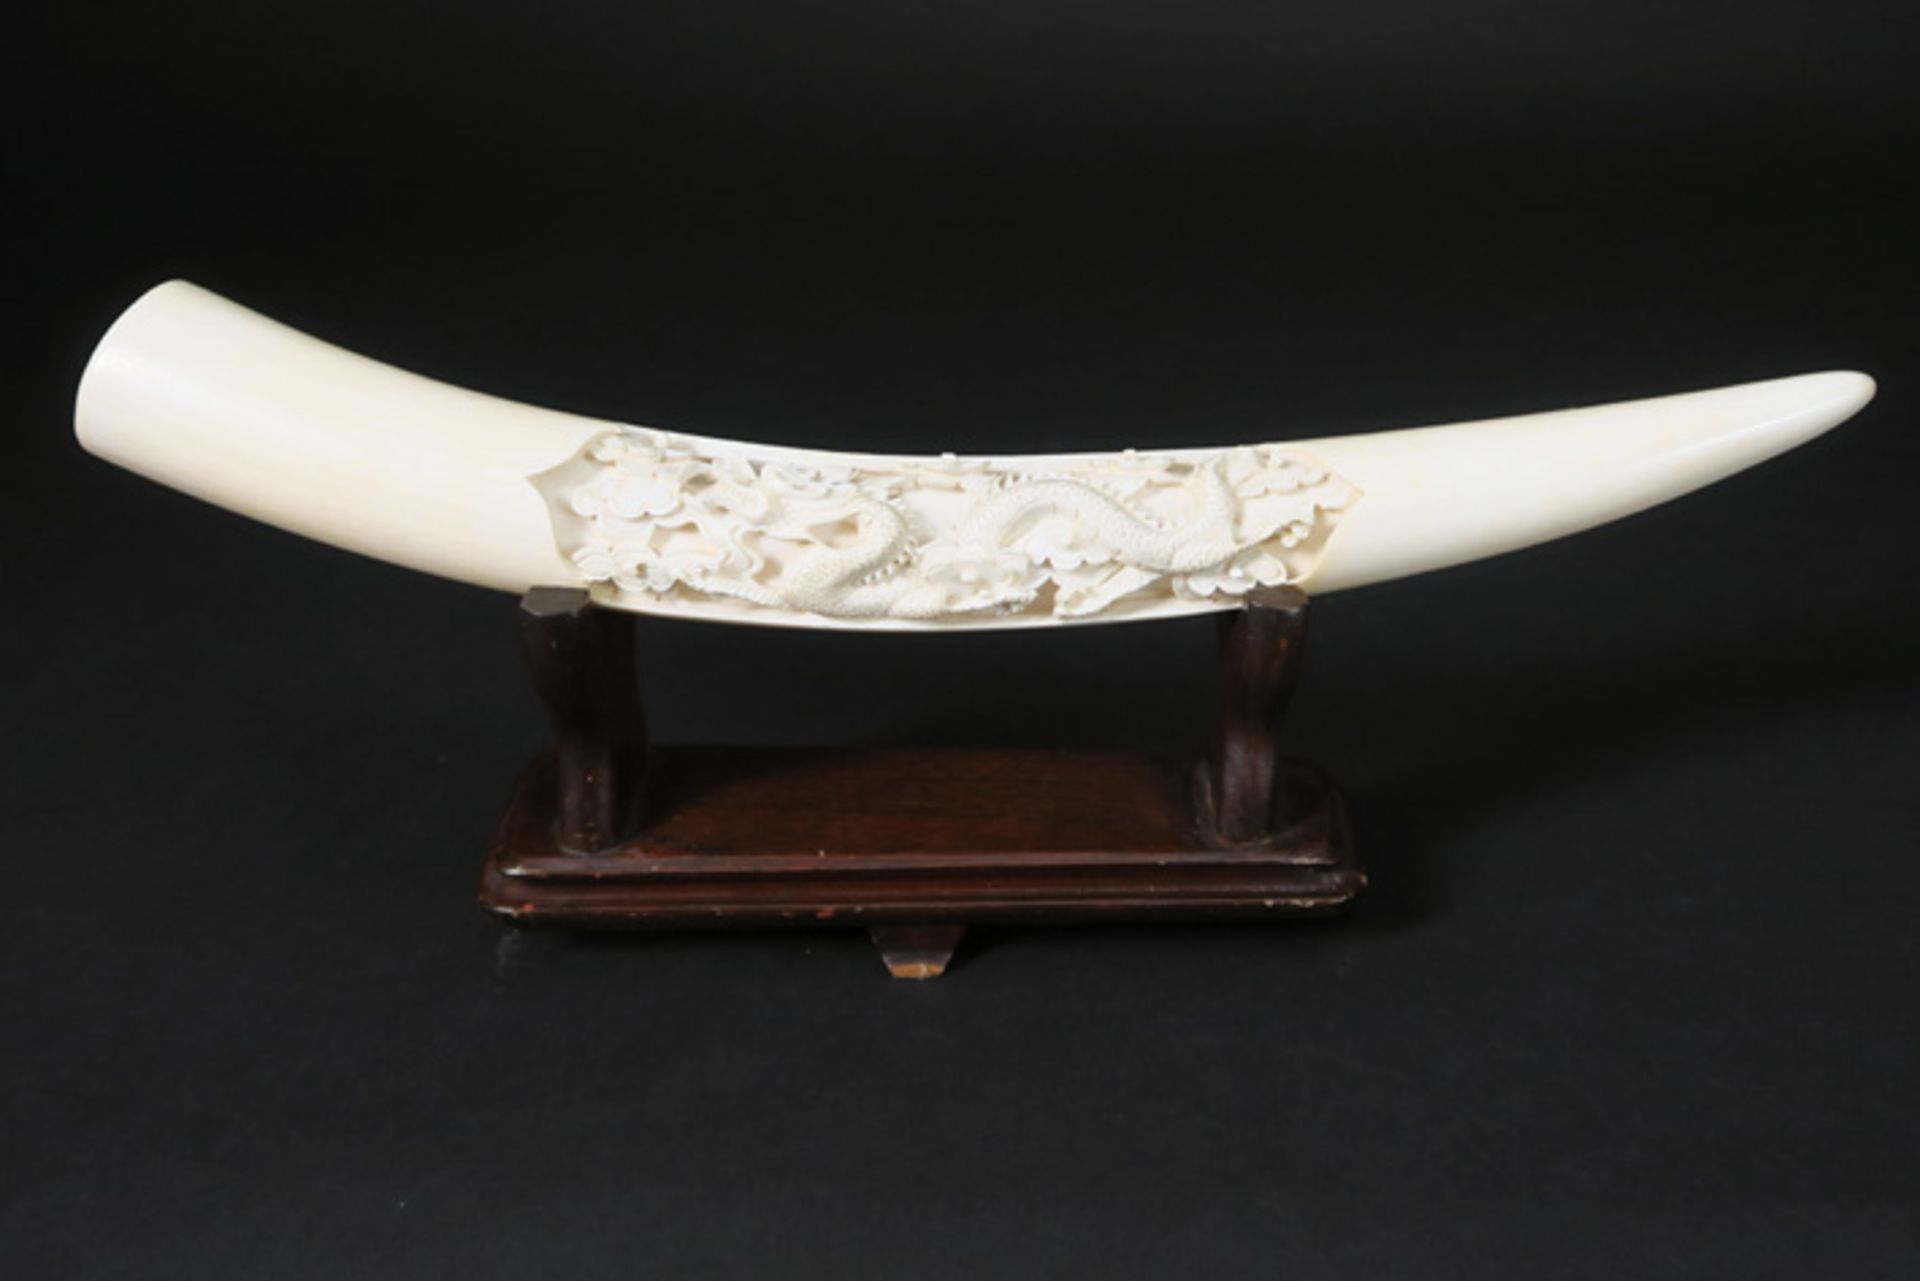 Chinese ivory tusk with a sculpted dragon decor Chinese ivoren "tand" met gesculpteerd drakendecor -